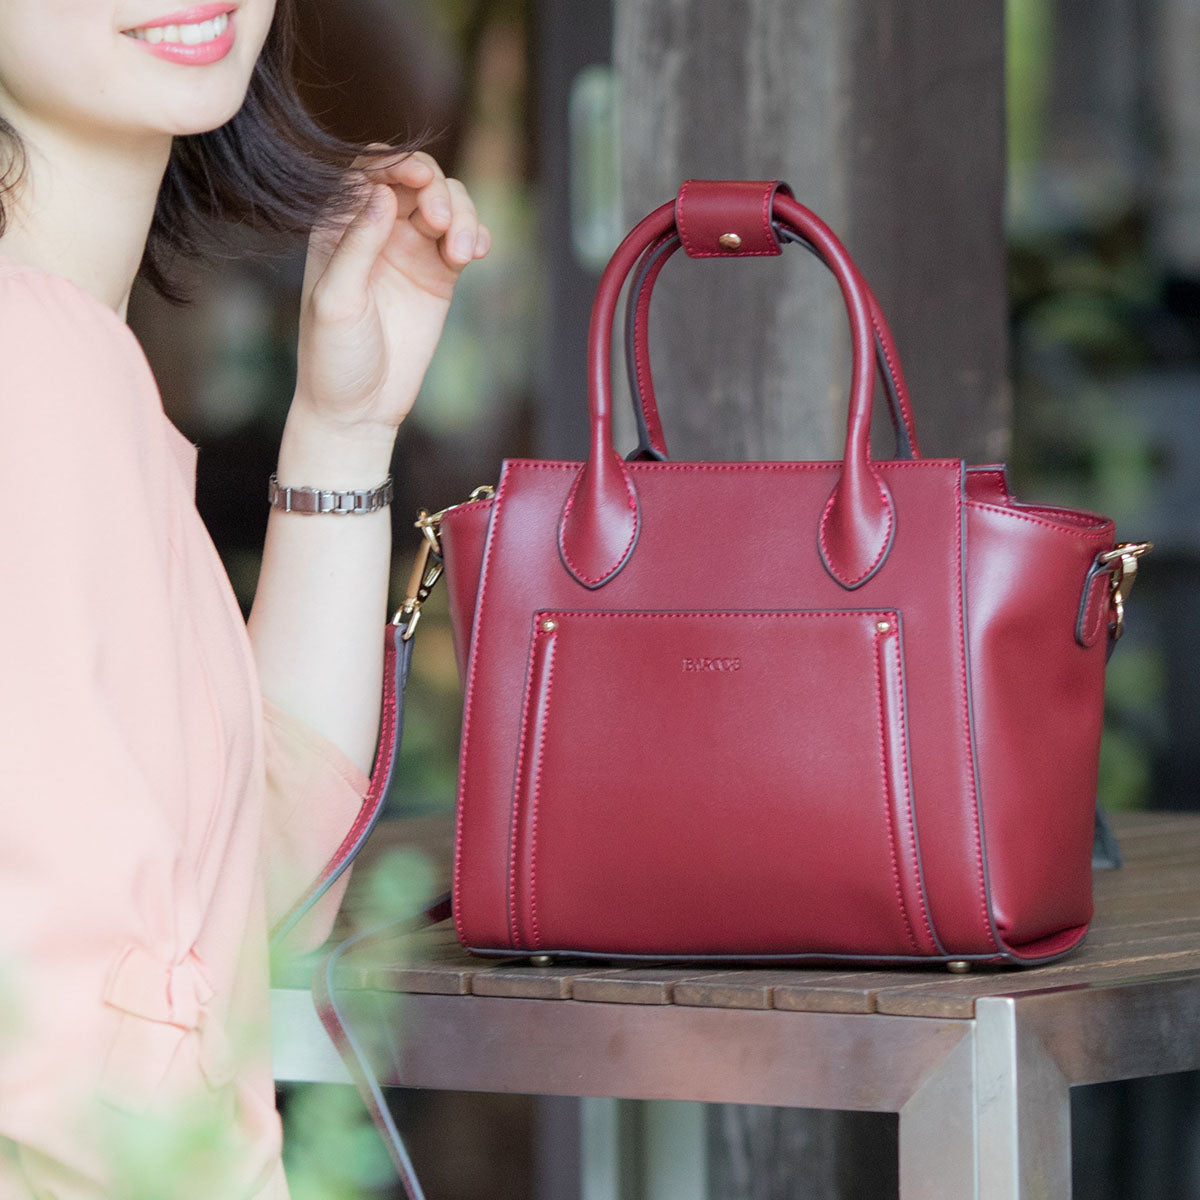 Claire 2-Way All Leather Bag